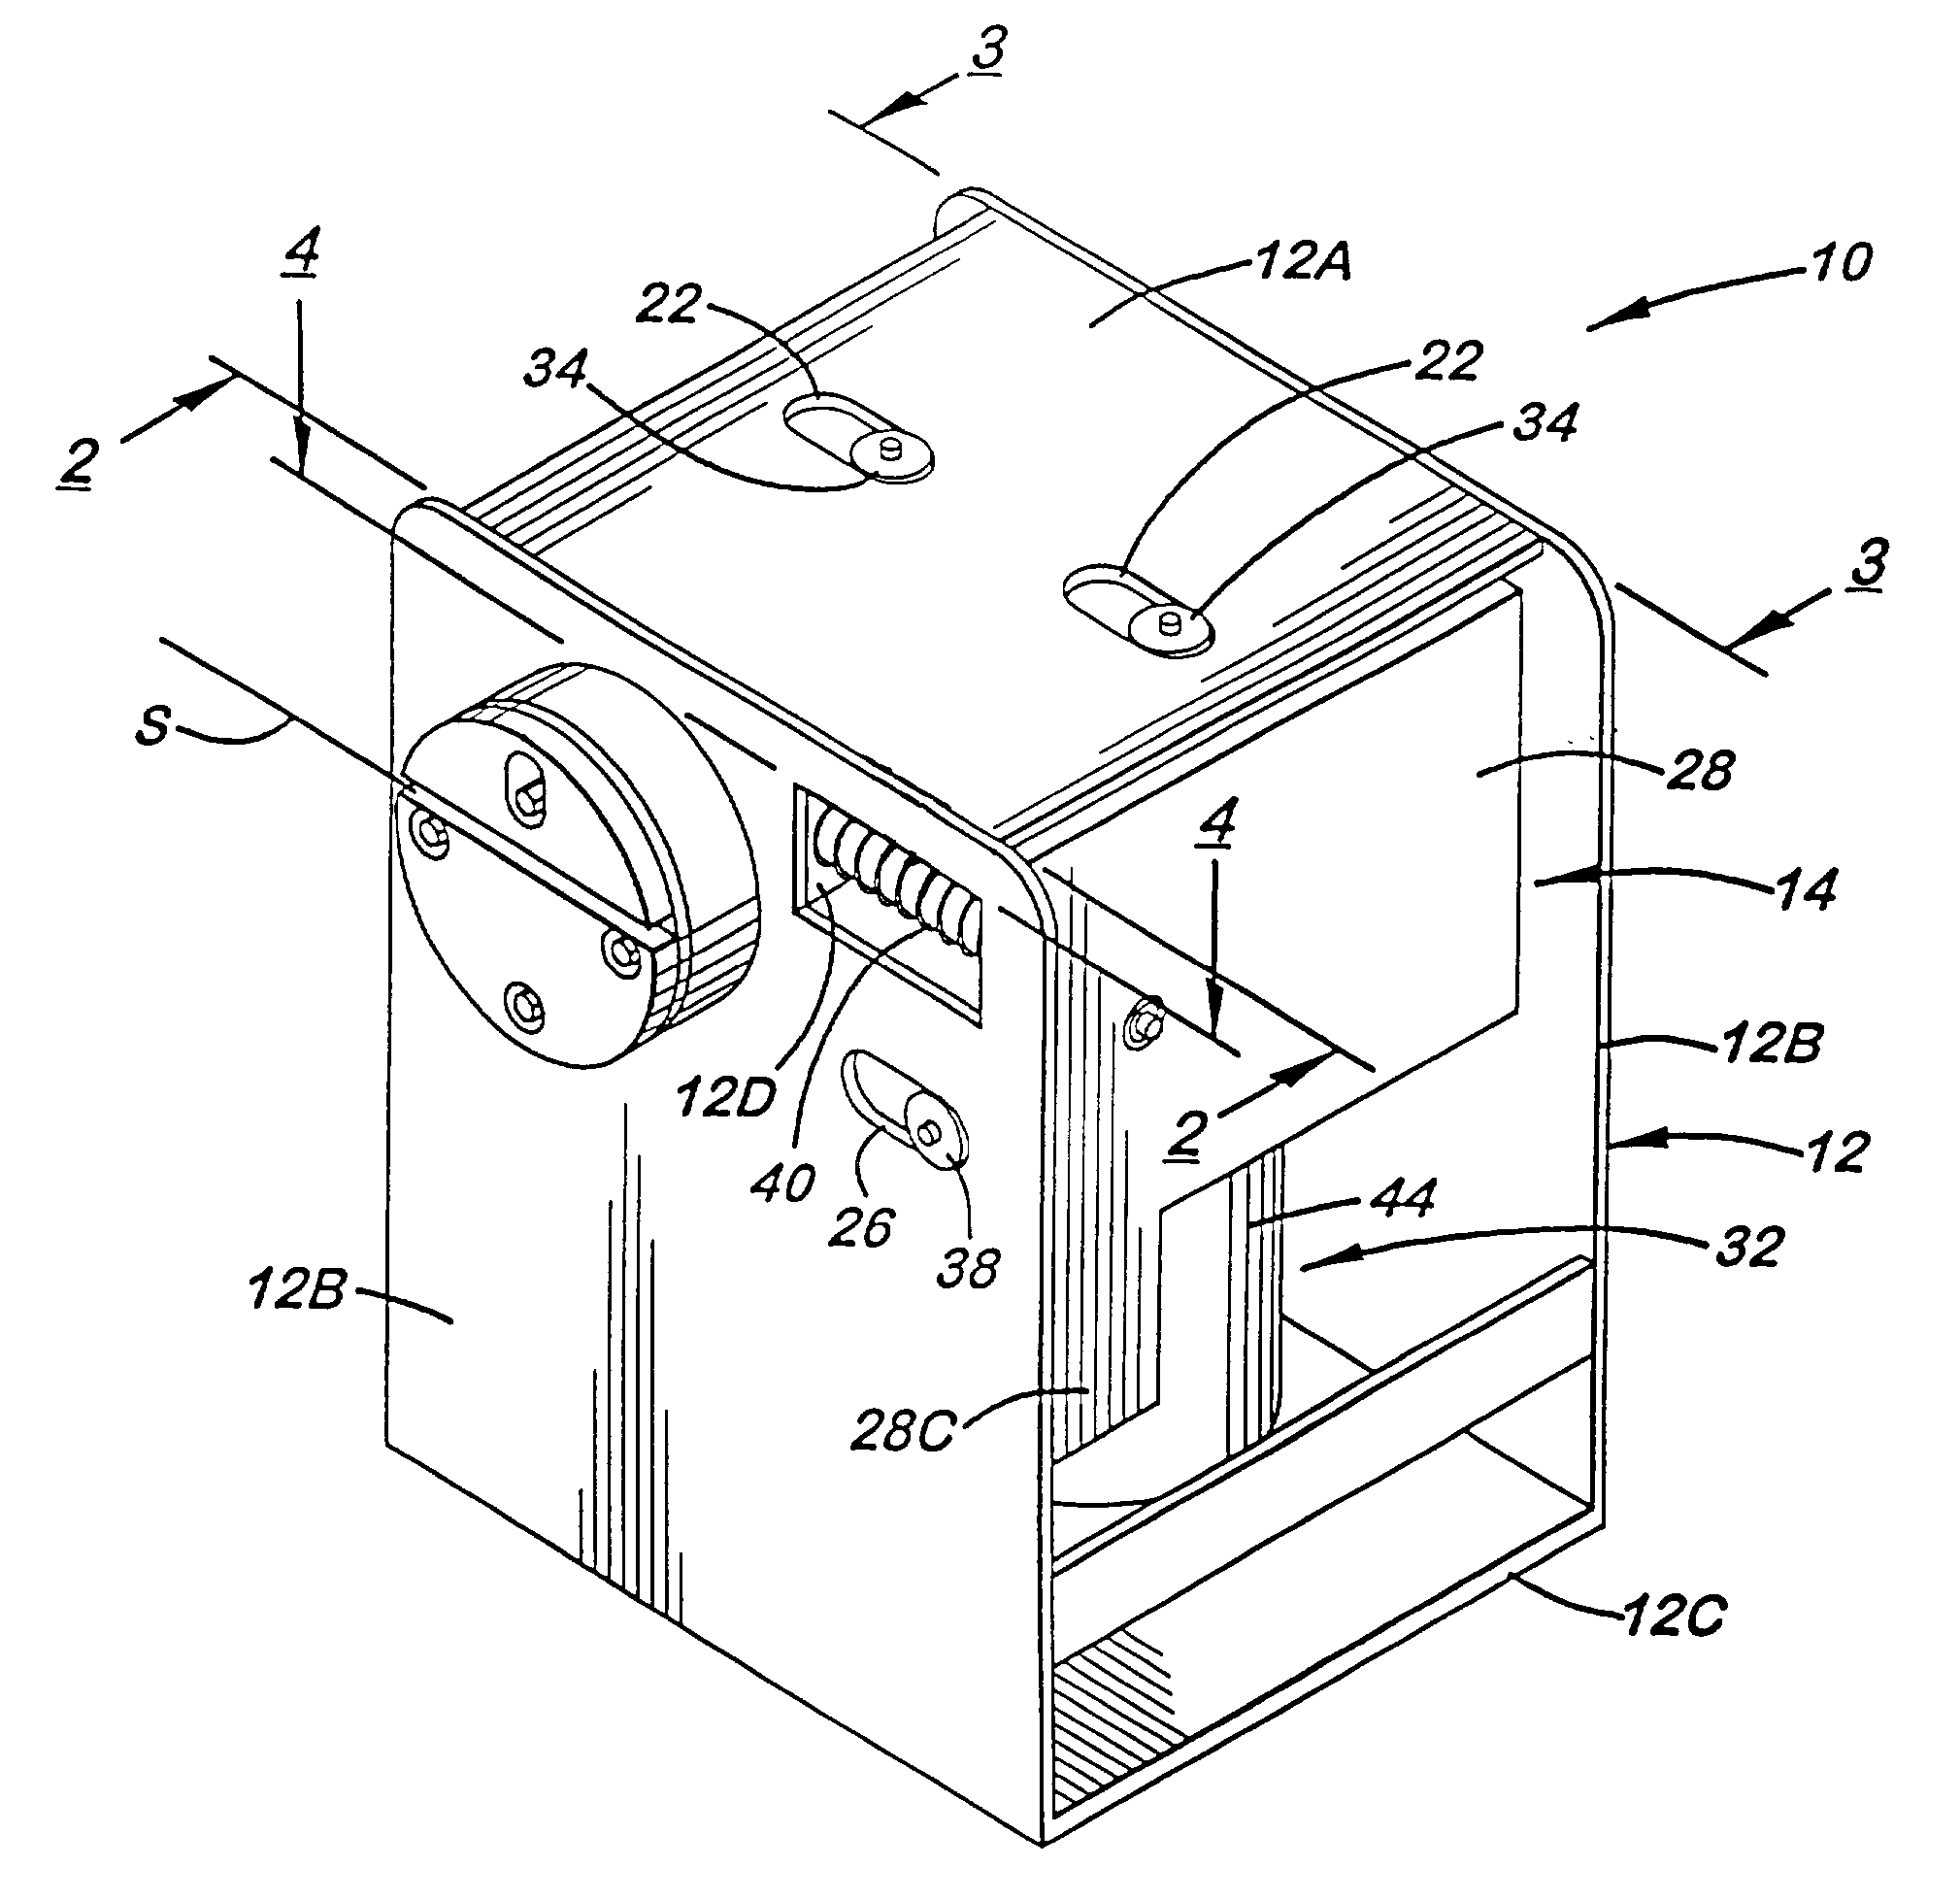 String tensioning force controlling apparatus for a racket stringer